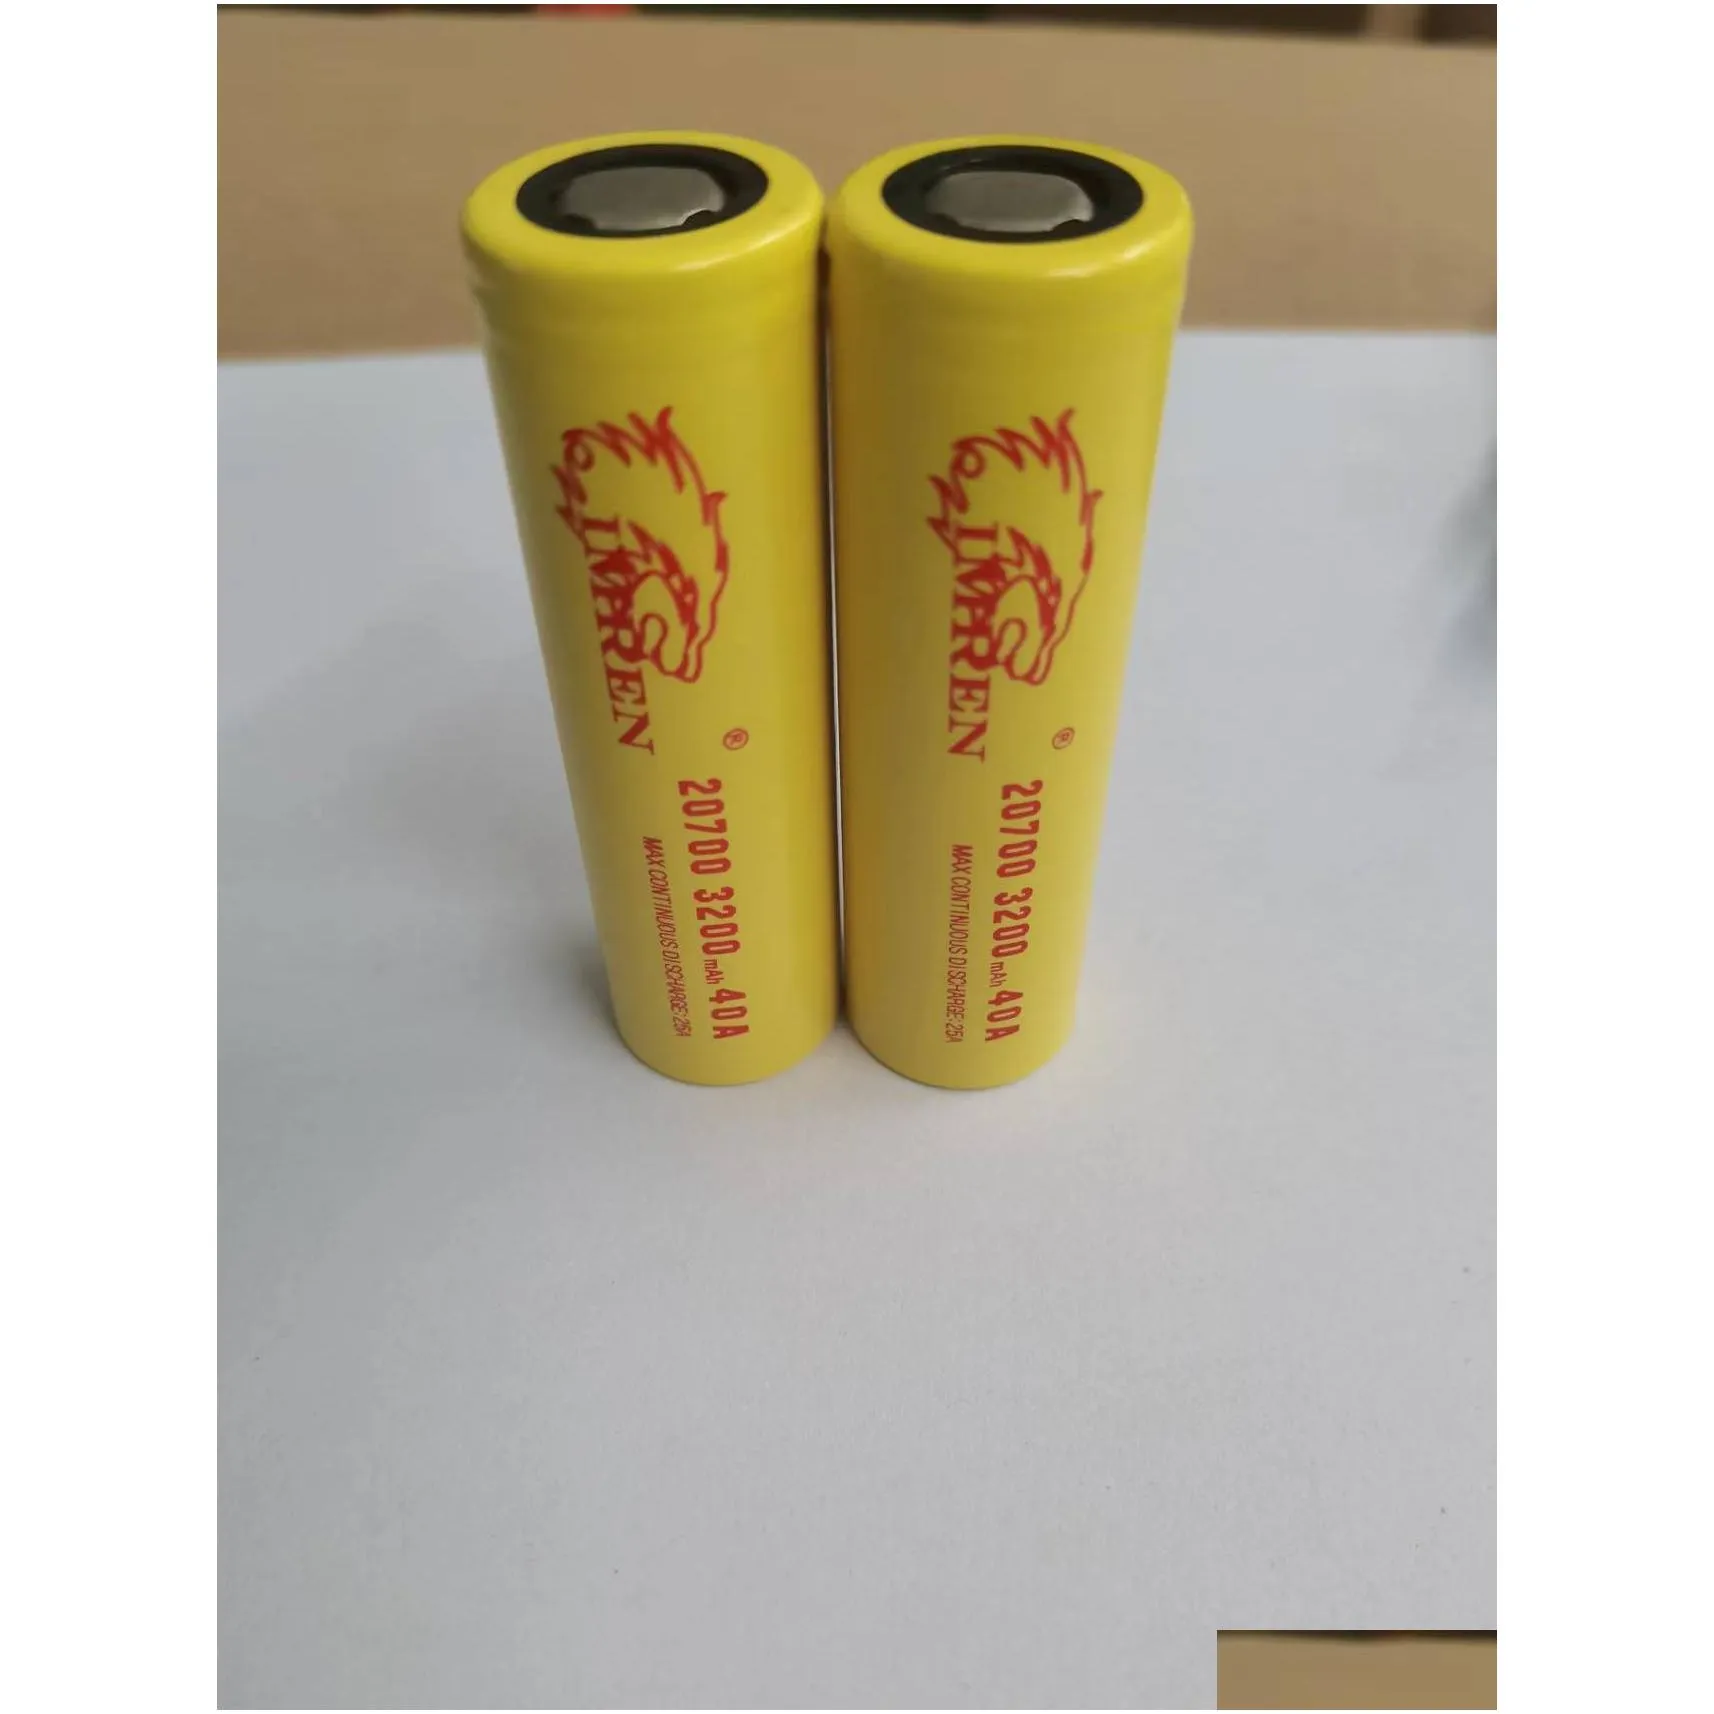 top quality imr 20700 21700 battery gold 3200mah green 4800mah 3.7v 30a 40a high drain rechargeable lithium vape mod dry batteries